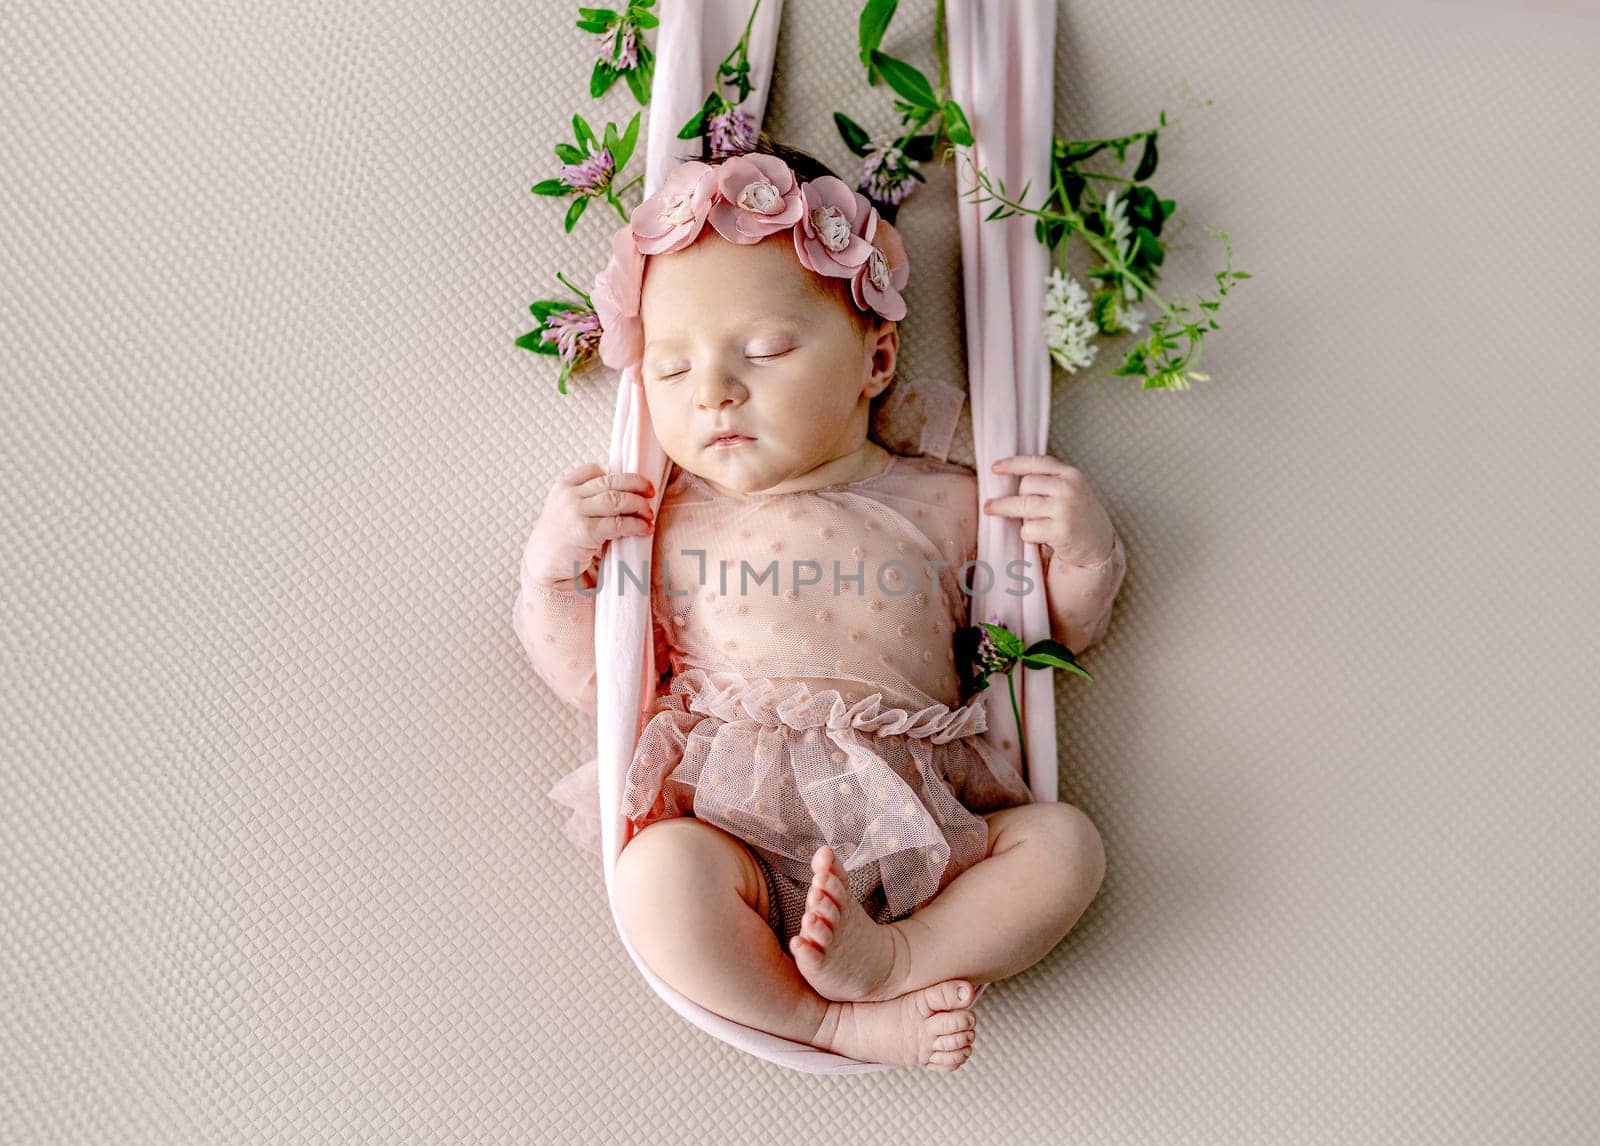 Newborn baby girl wearing dress and wreath sleeping in swing decorated with flowers. Cute infant child kid stylish studio portrait